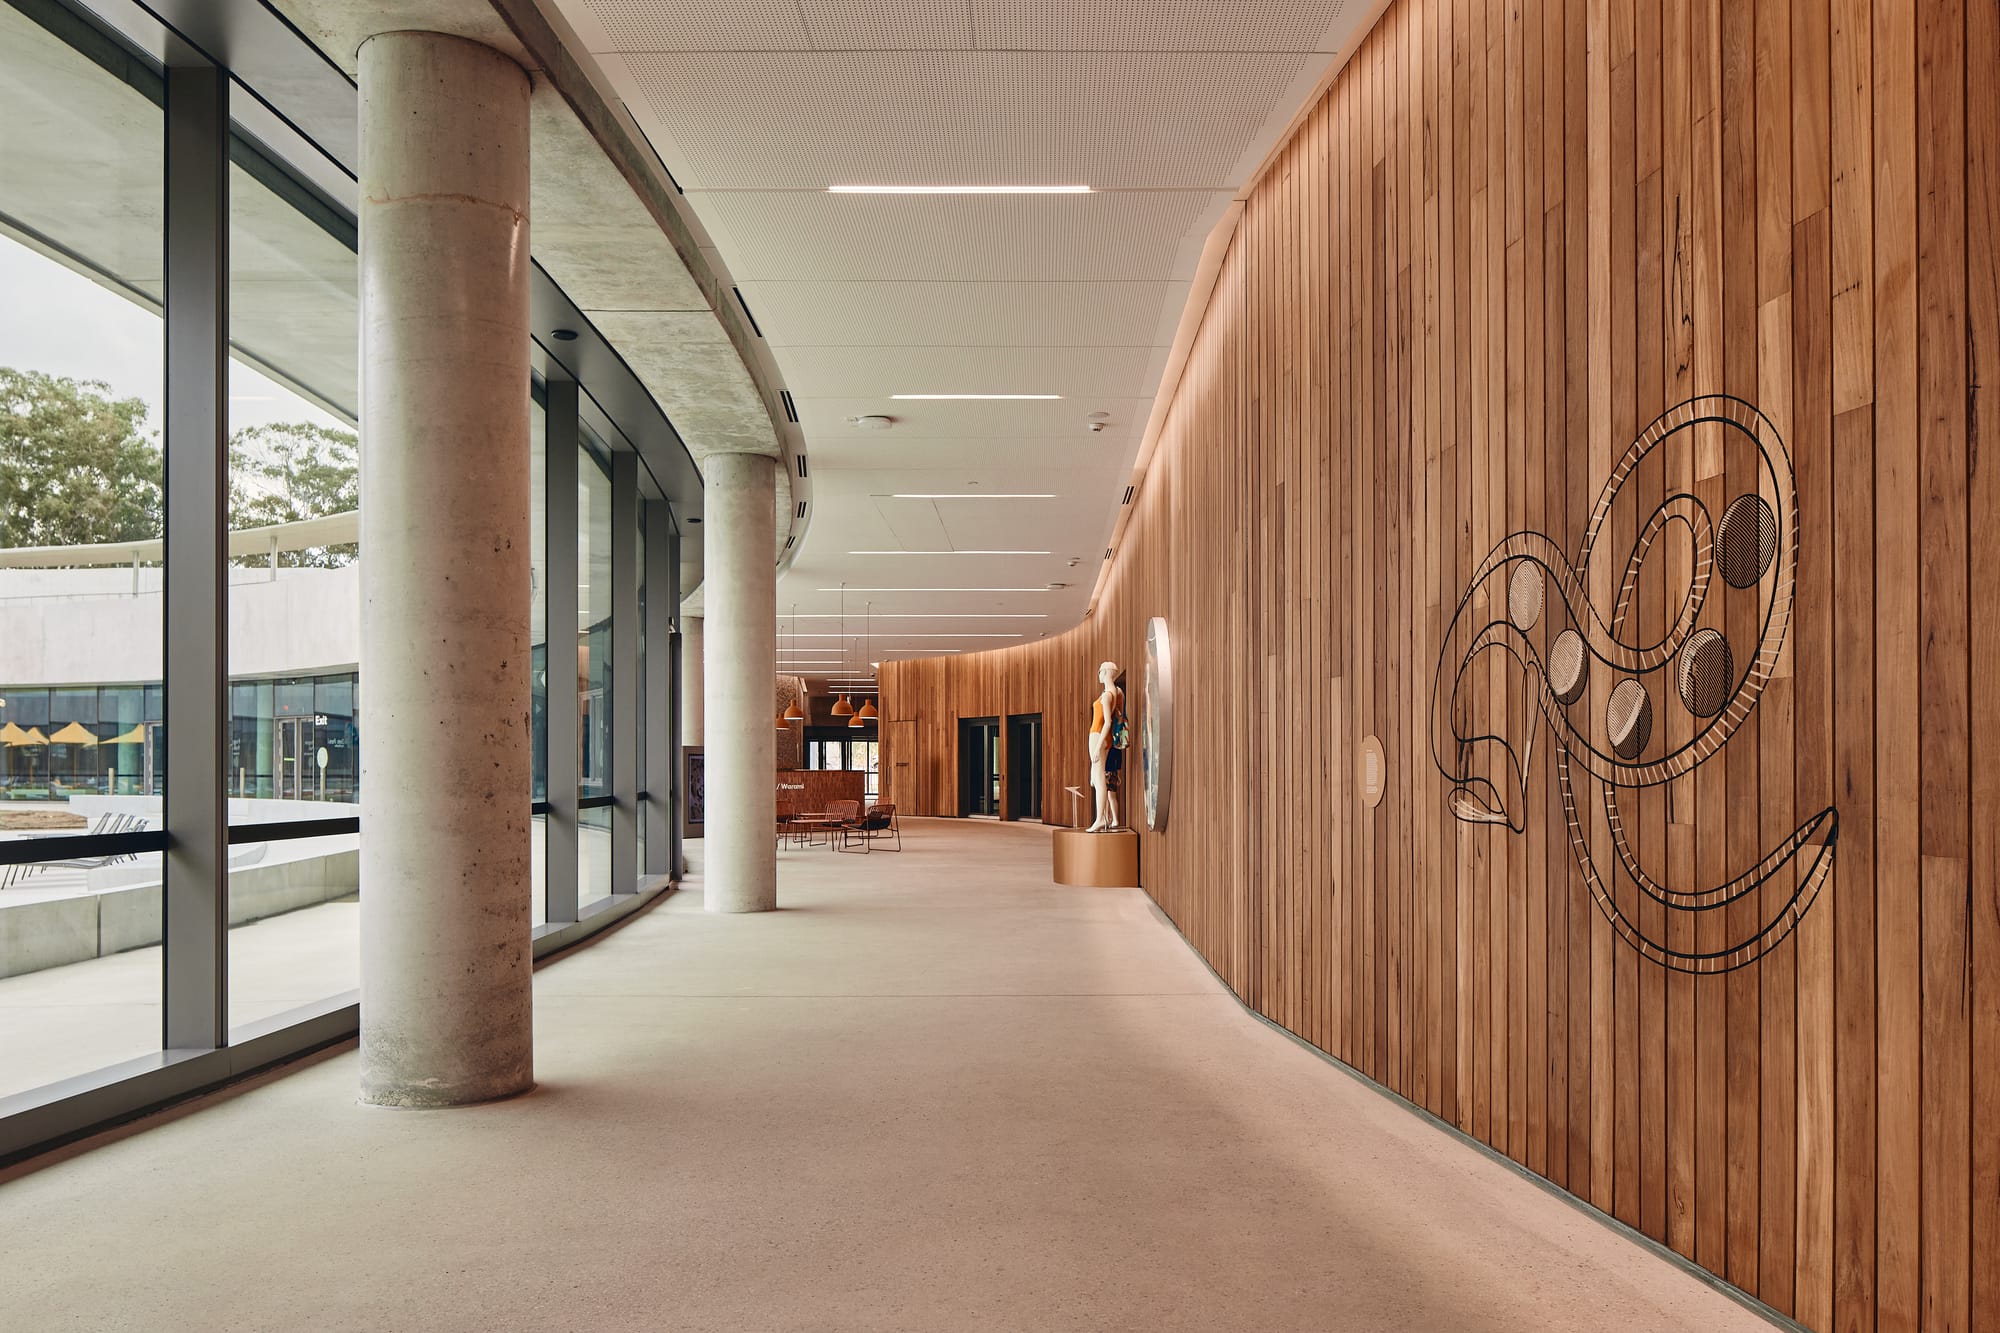 Parramatta Aquatic Centre by Mortlock Timbers. Photography by Peter Bennetts. Indoor walkway with timber clad walls on right and glass windows on right. Snake design on timber walls.